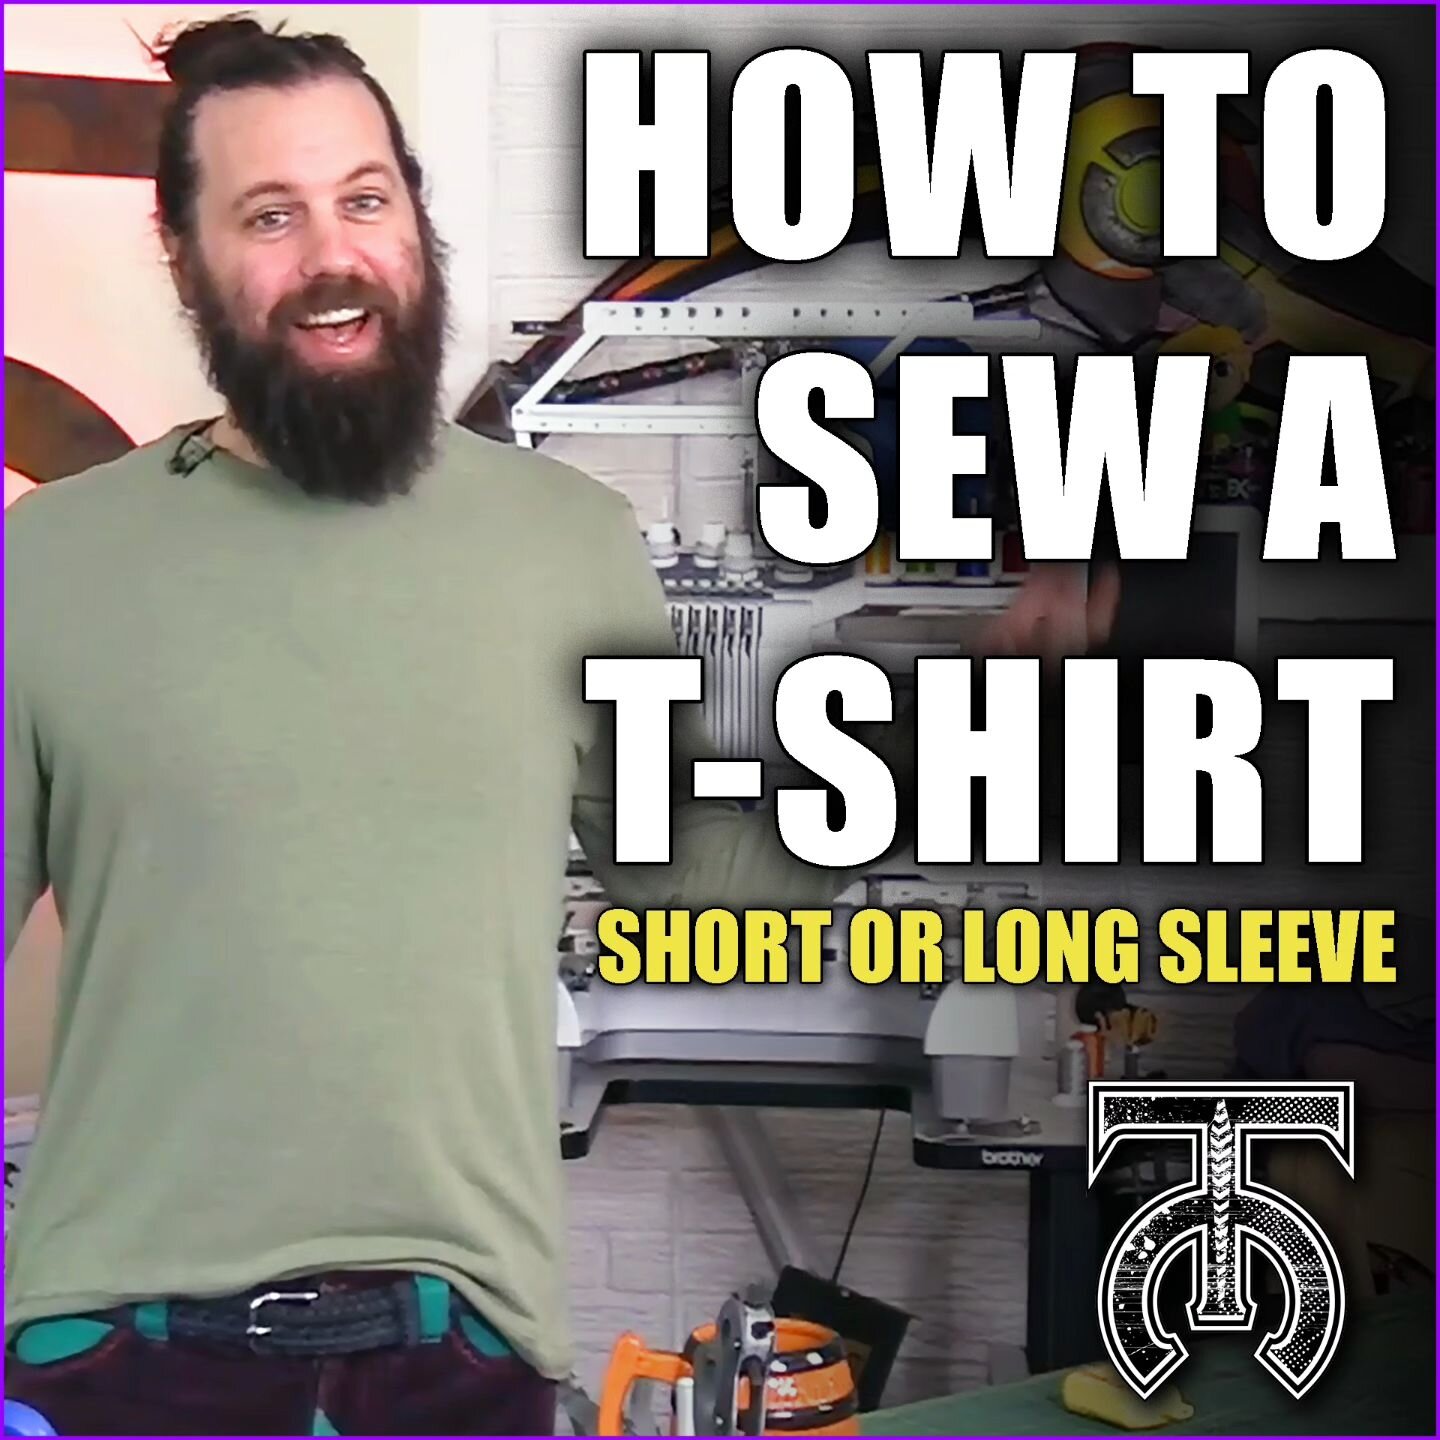 Happy to share a new video helping people understand the basics of knit fabrics, and step by step instructions on making a custom fitted T-shirt from scratch 😀 

@brothersews @brothercraftsusa @sewingmachinesplusdotcom @famorecutlery #sewingtutorial